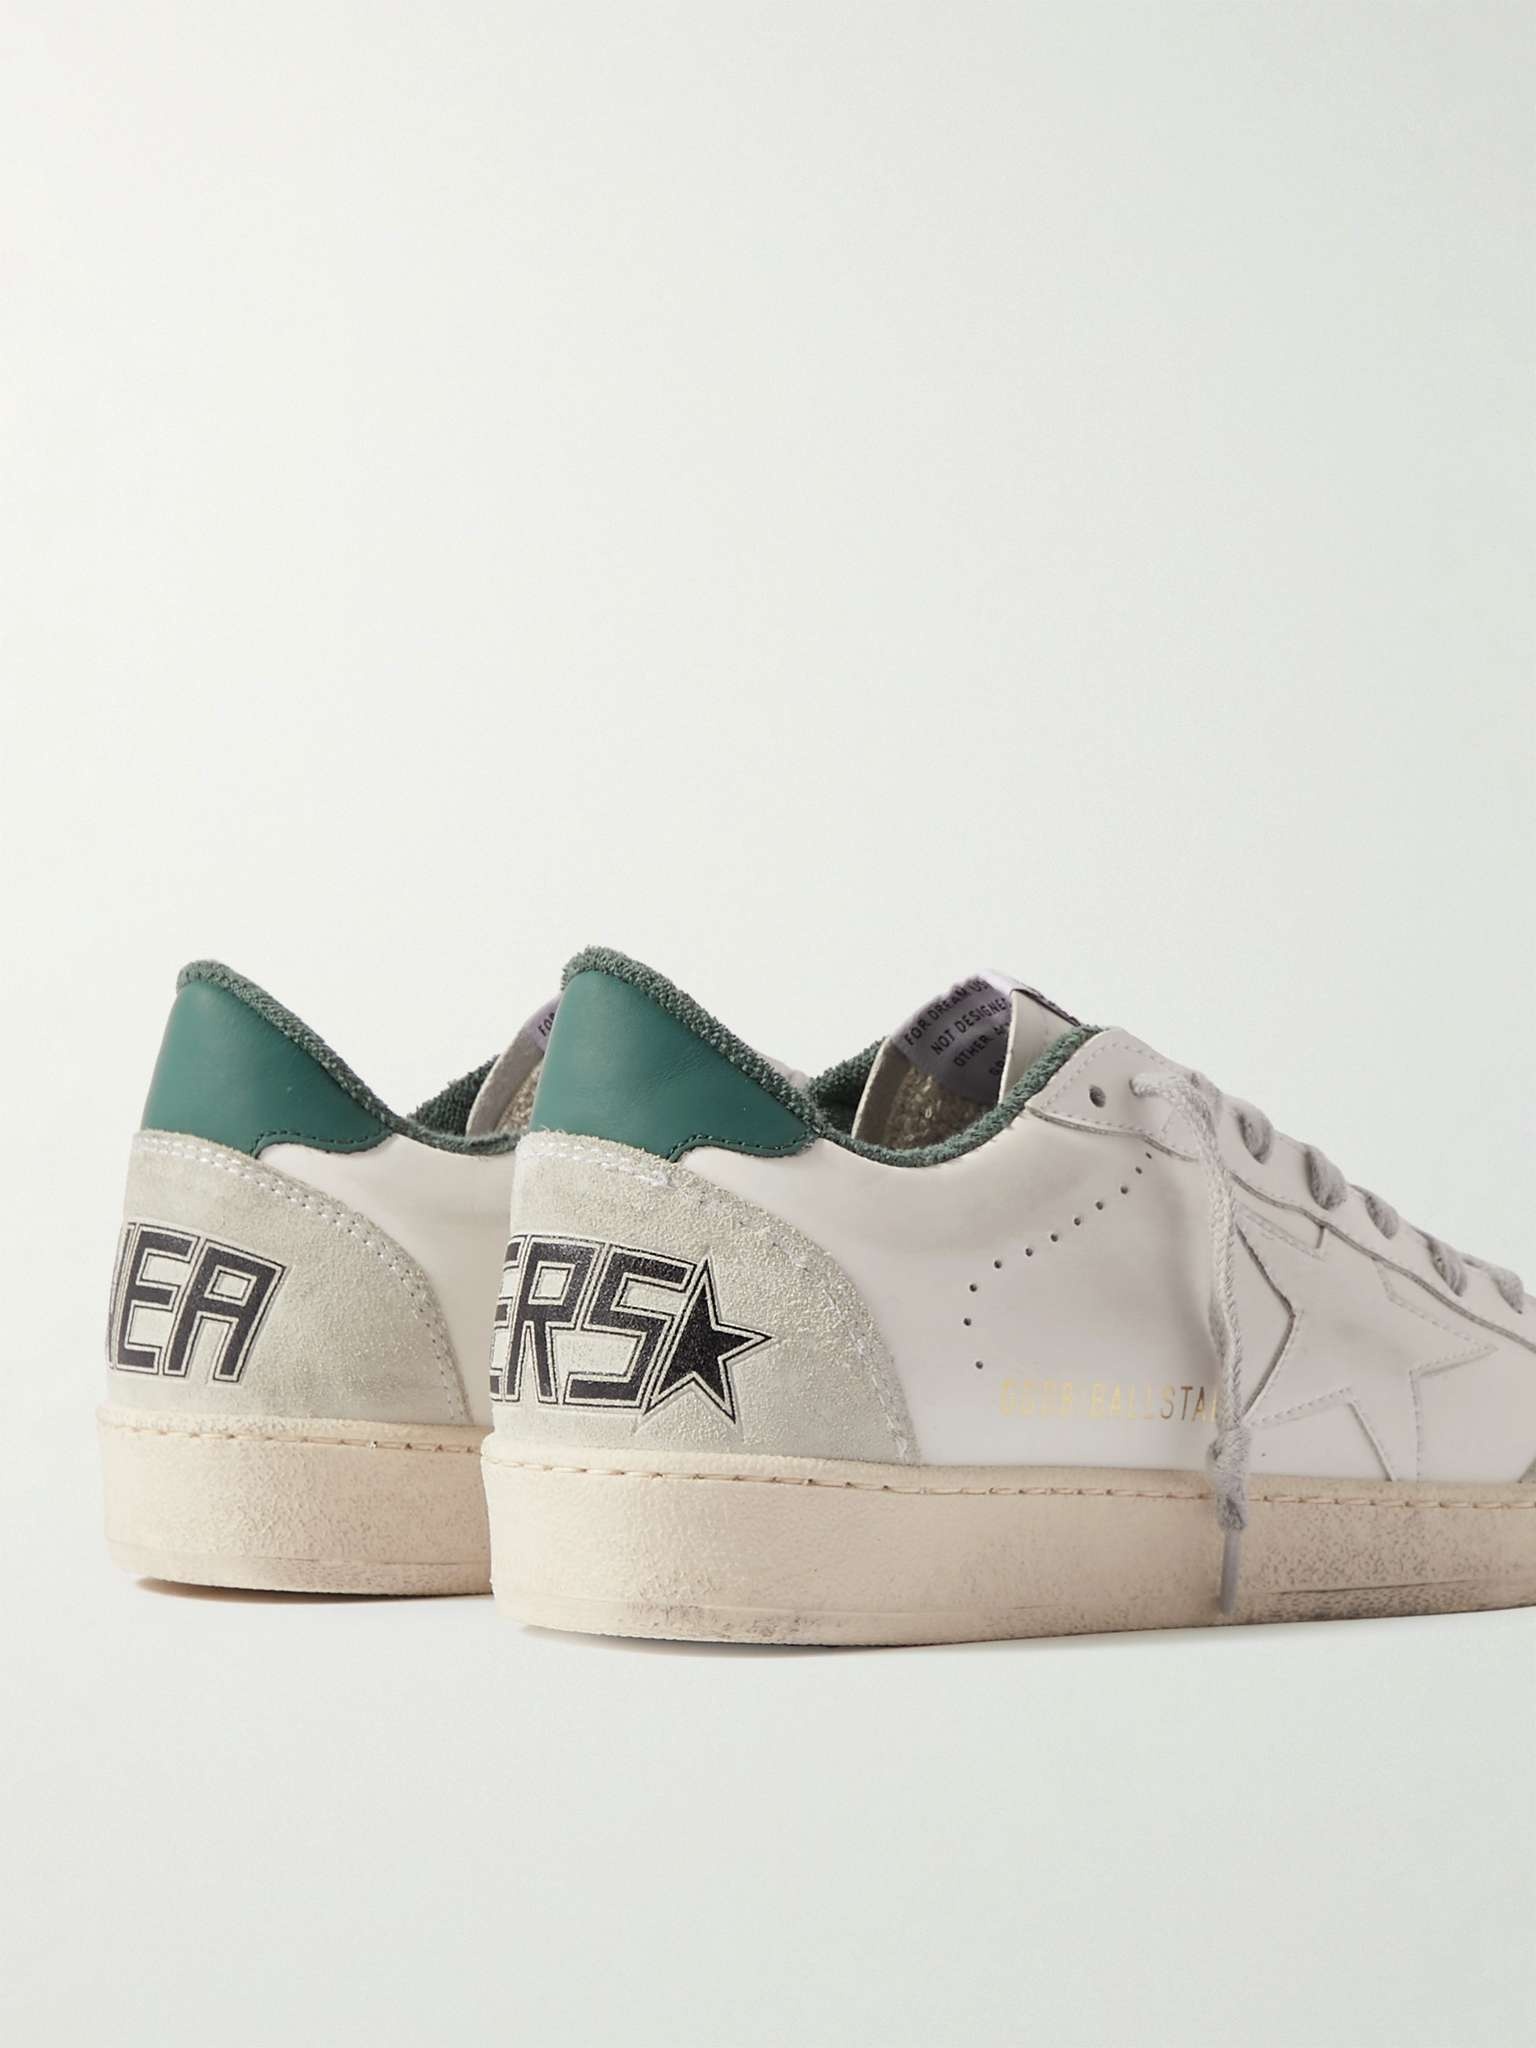 Ball Star Distressed Suede-Trimmed Leather Sneakers - 5